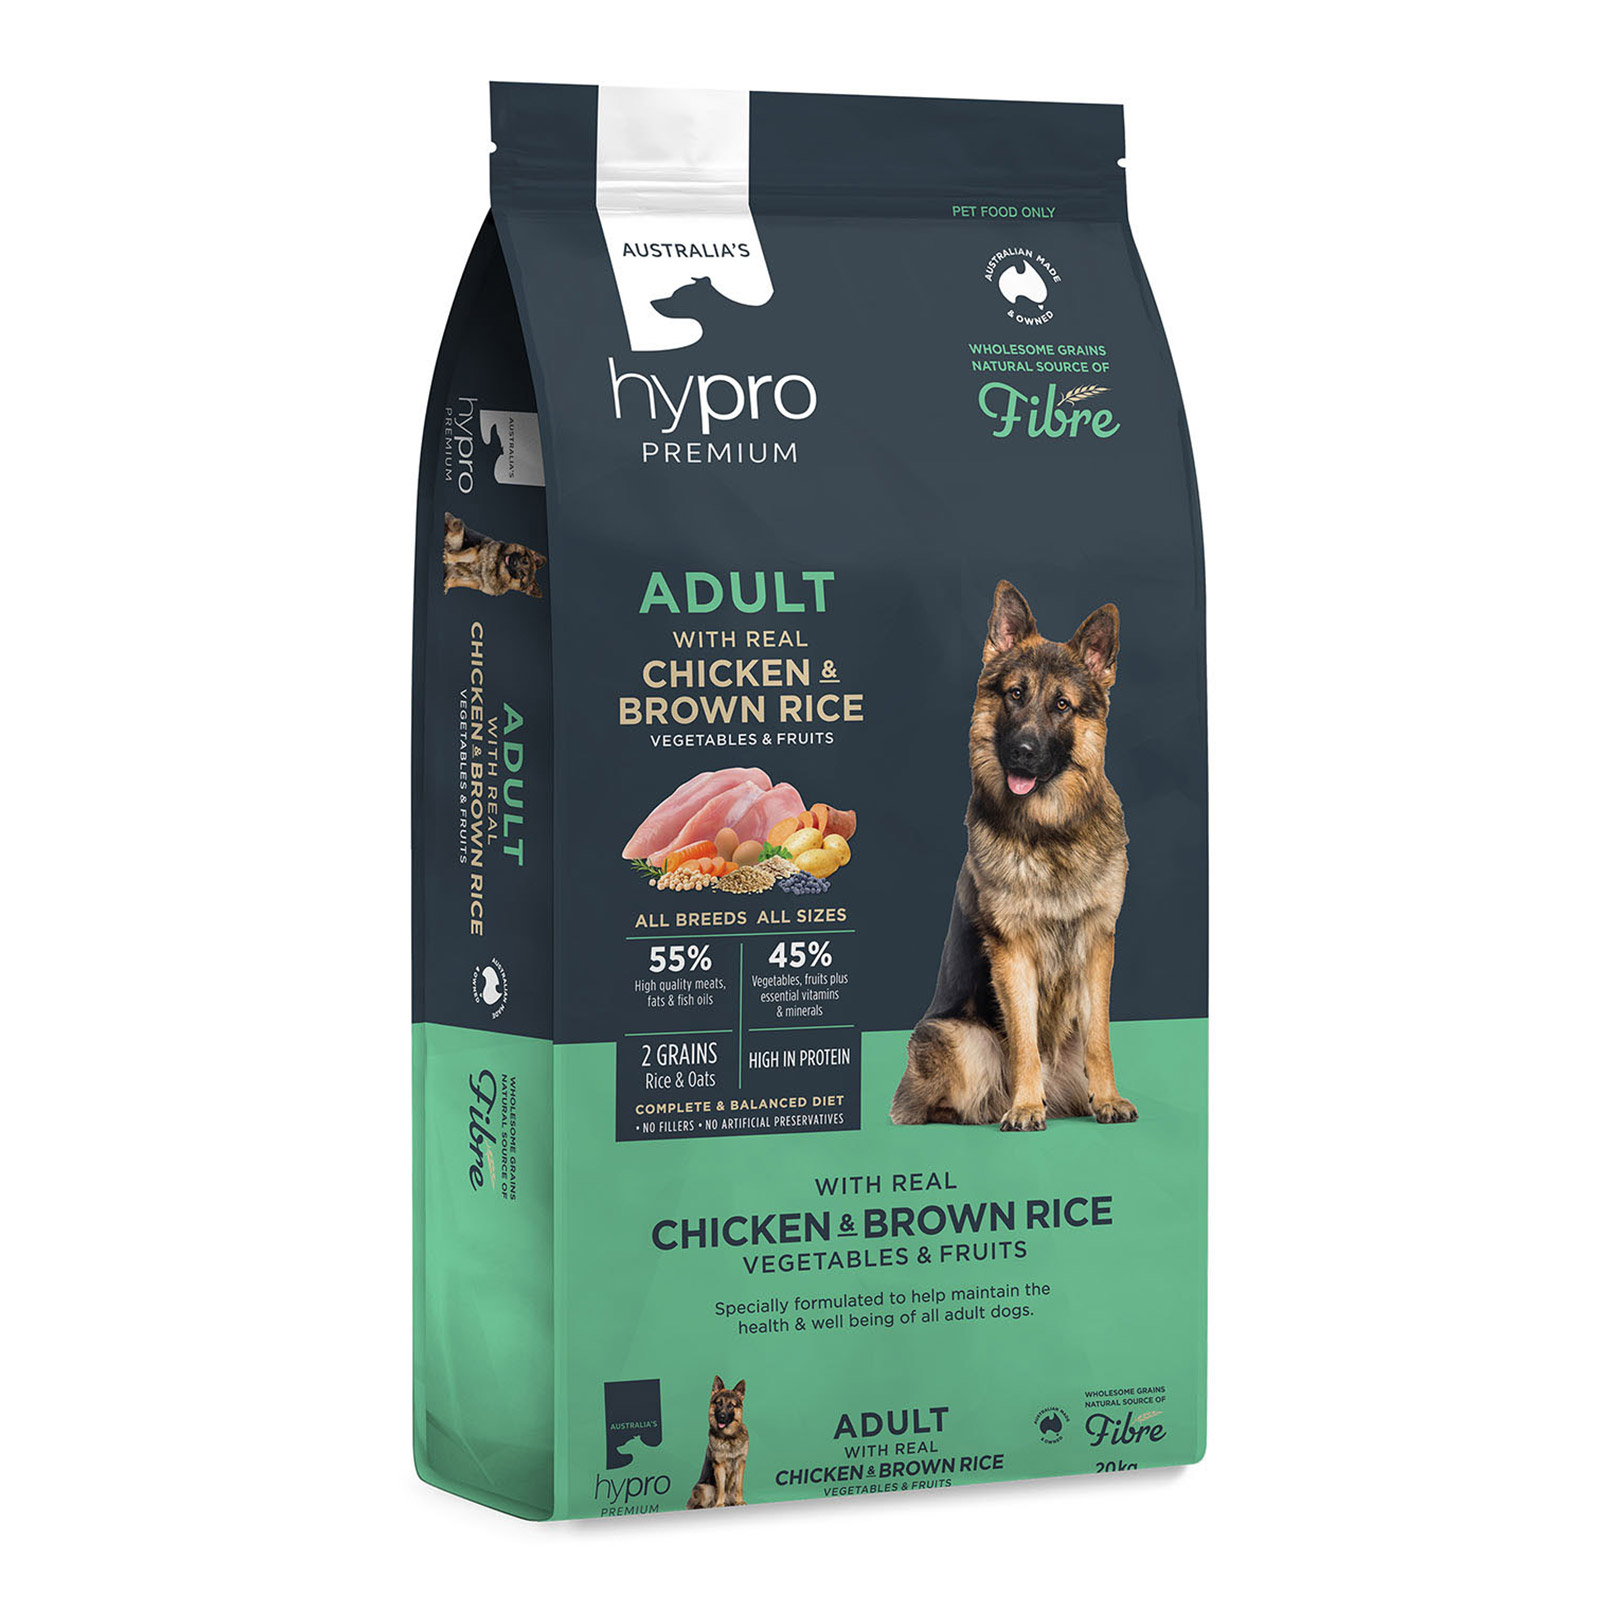 Hypro Premium Wholesome Grains Adult Dog Food (Chicken & Brown Rice) for Food